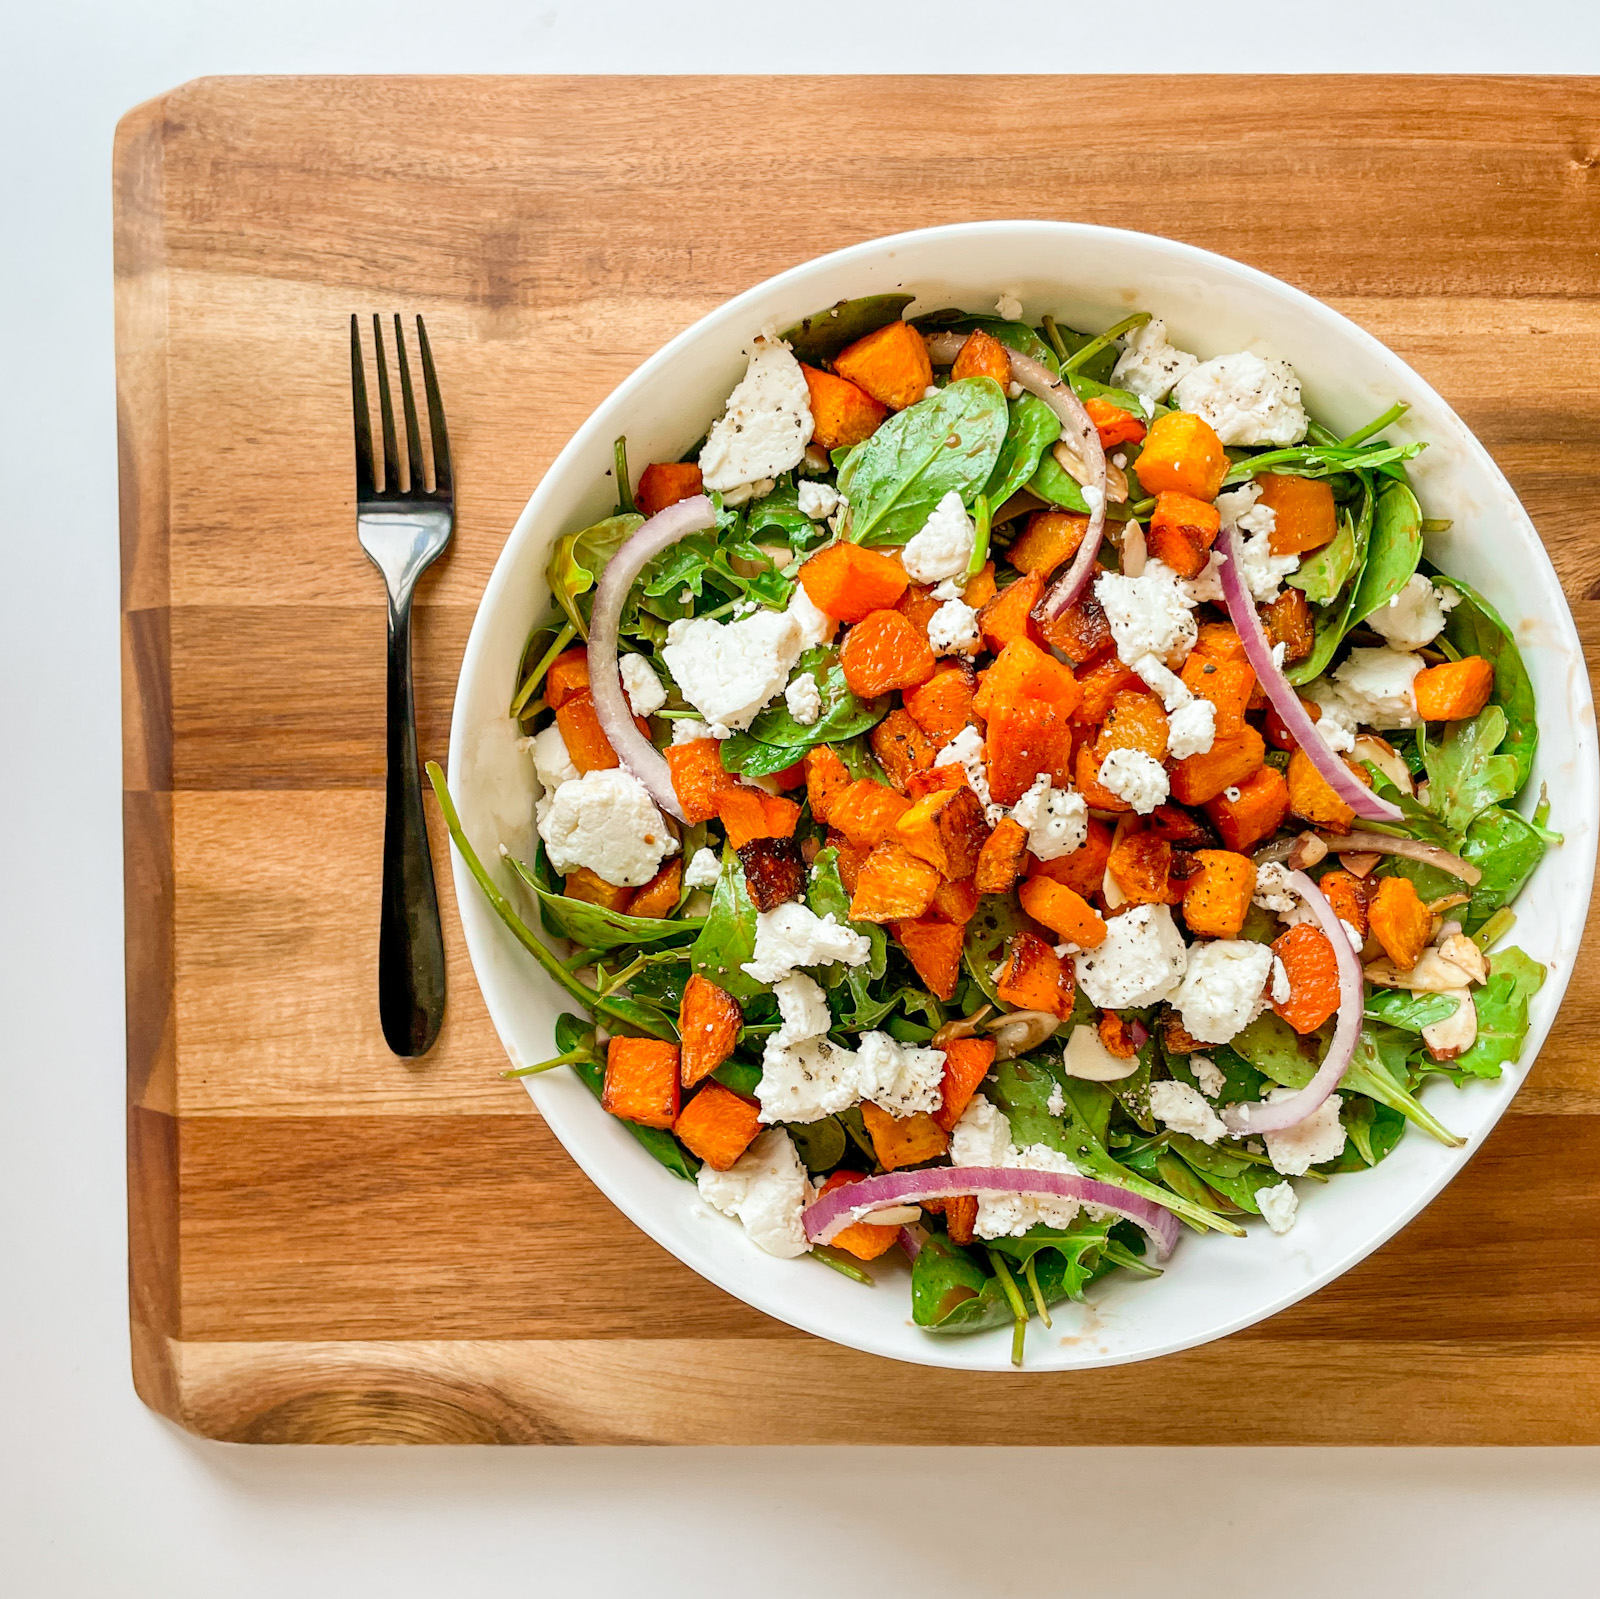 Roasted Butternut Squash, Goat Cheese and Spinach Salad